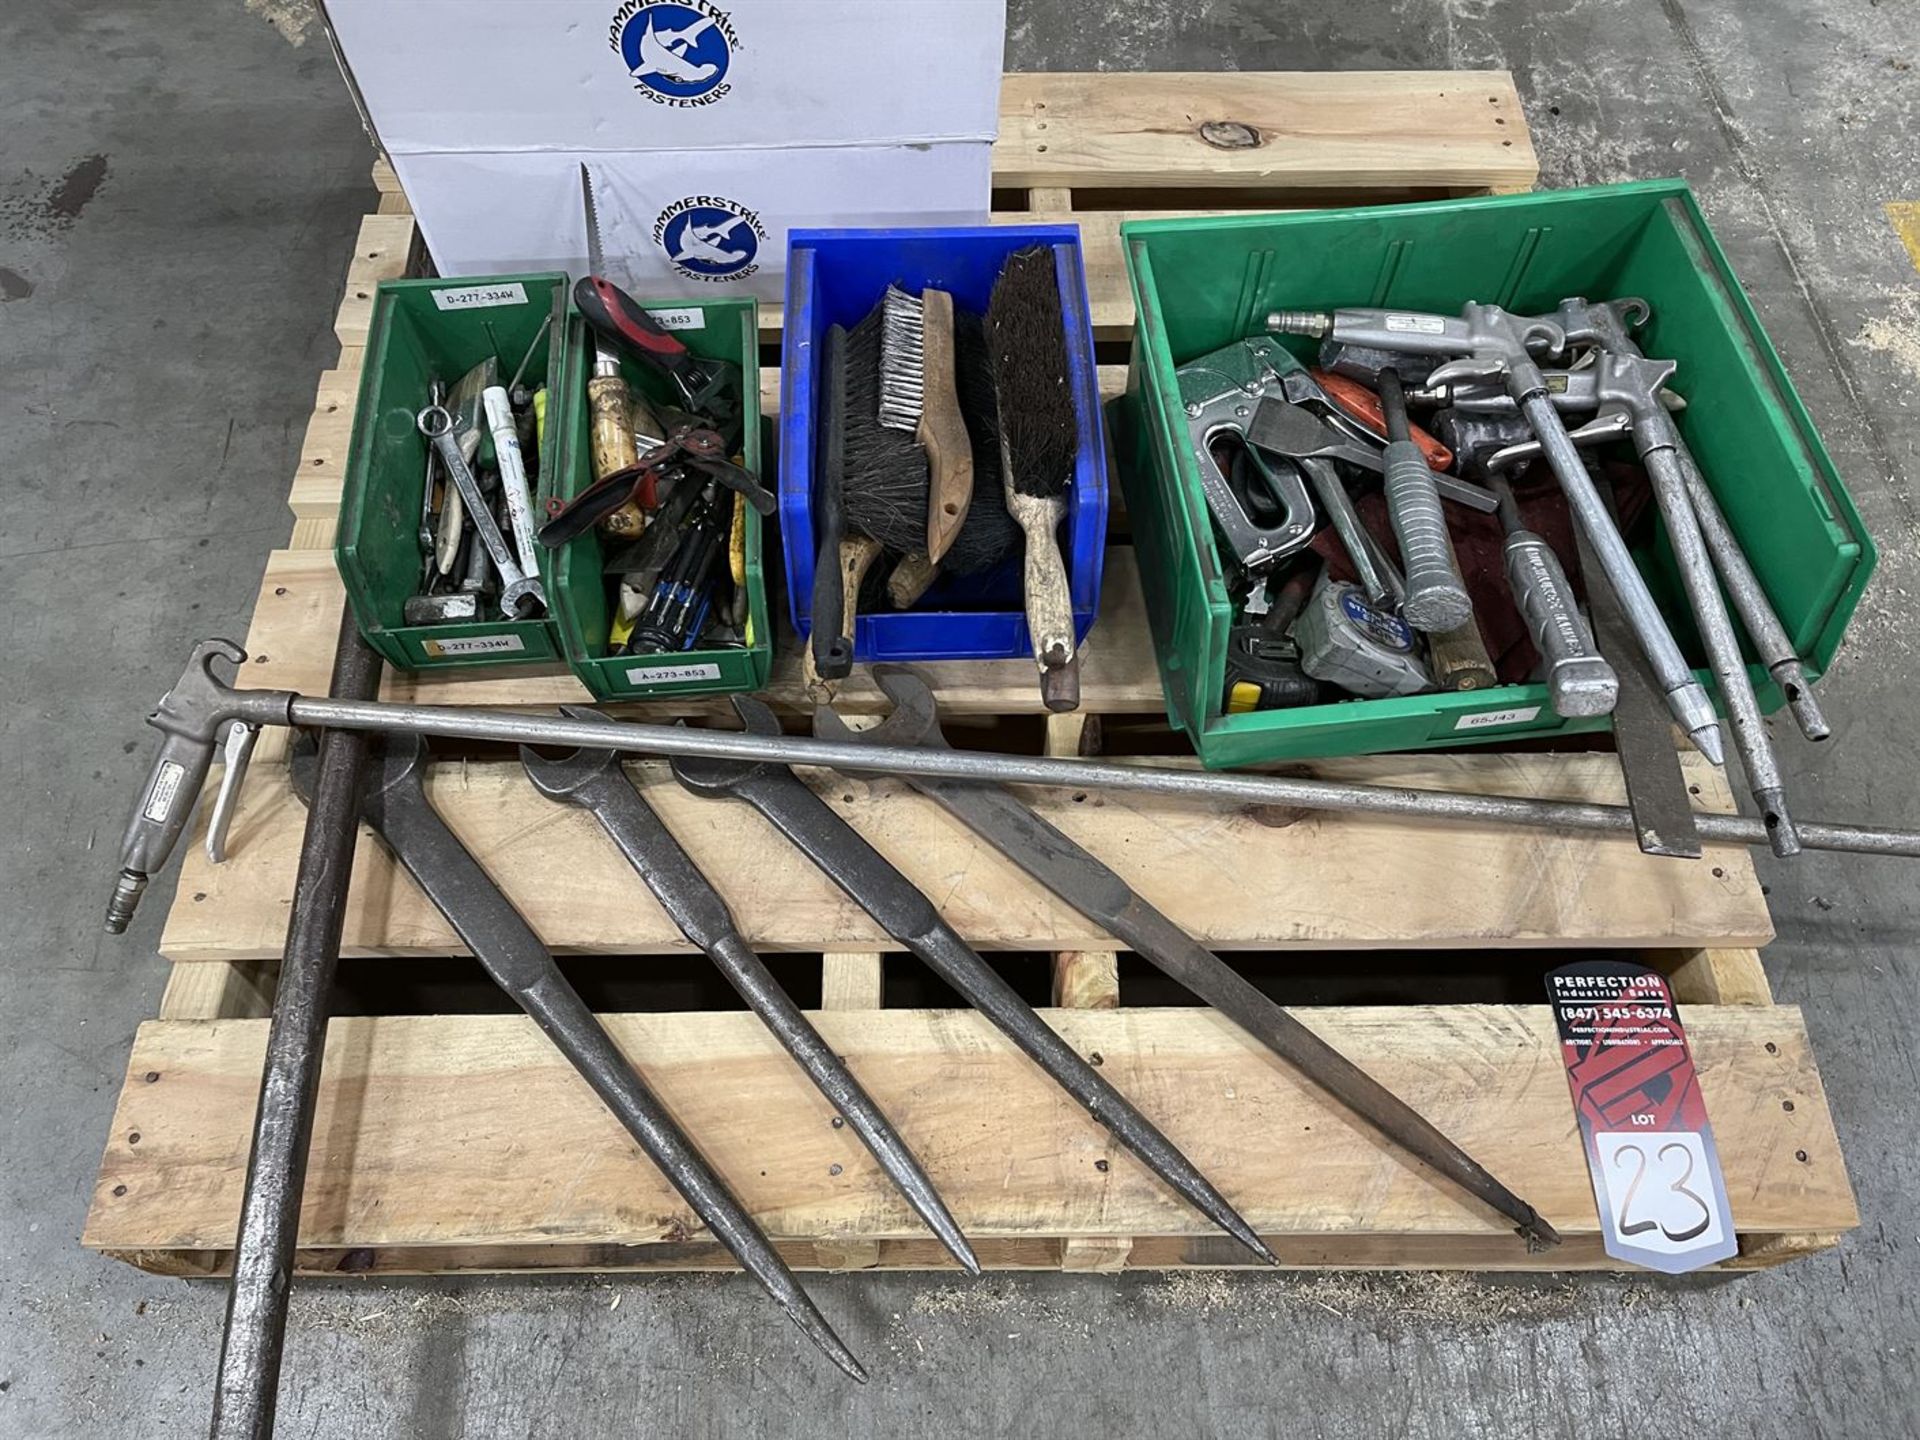 Lot of Assorted Hand Tools Including Wrenches, Pry Bars, Air Guns, Wire Brushes and Rolls of Nails - Image 2 of 2